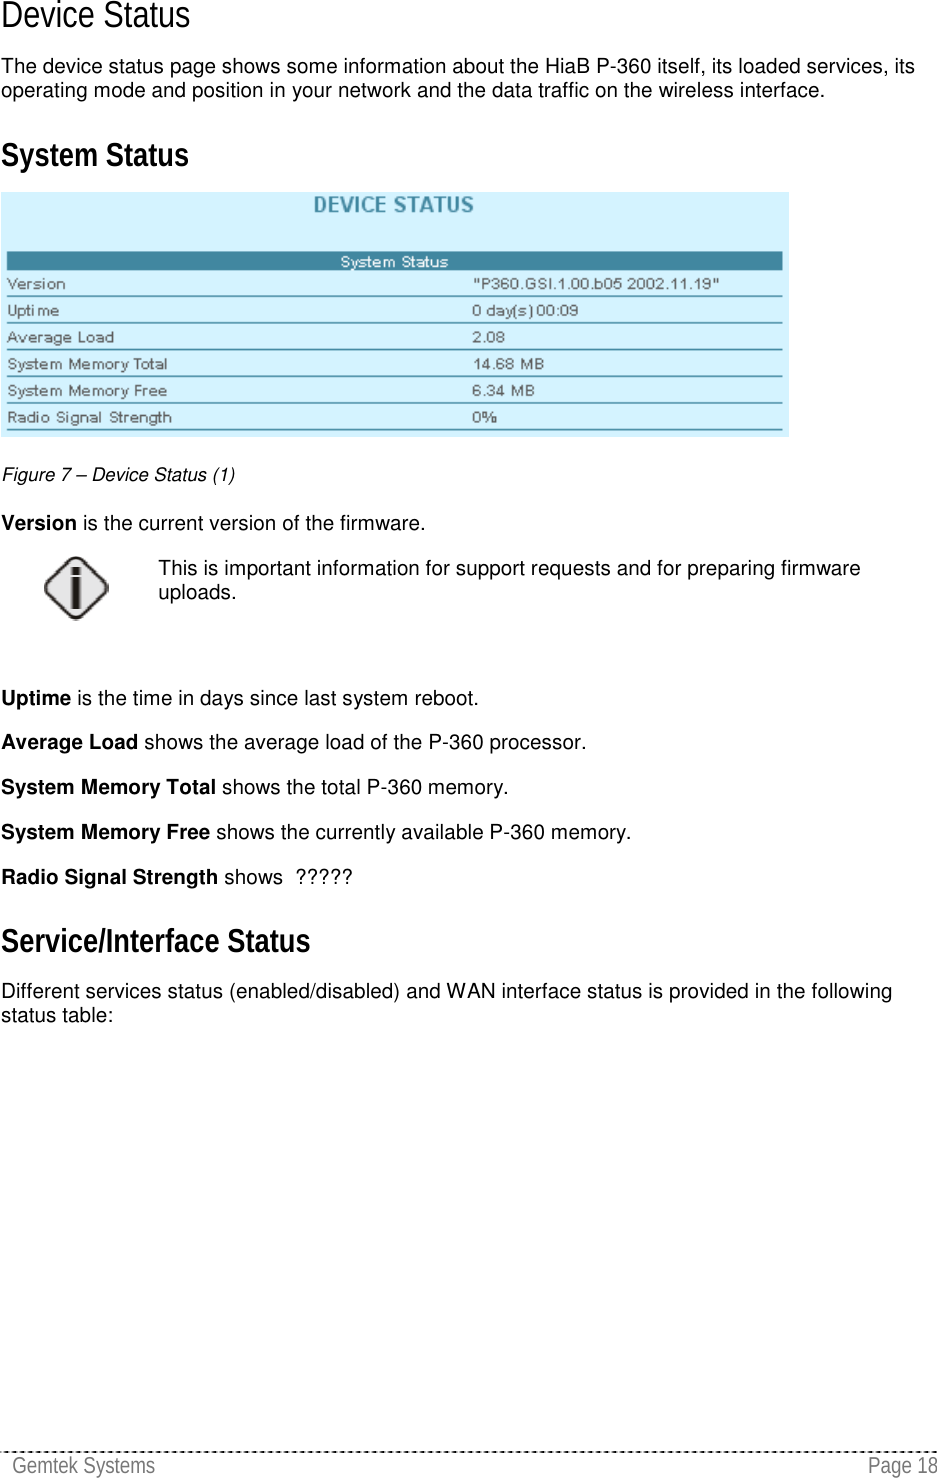 Gemtek Systems Page 18Device StatusThe device status page shows some information about the HiaB P-360 itself, its loaded services, itsoperating mode and position in your network and the data traffic on the wireless interface.System StatusFigure 7 – Device Status (1)Version is the current version of the firmware.This is important information for support requests and for preparing firmwareuploads.Uptime is the time in days since last system reboot.Average Load shows the average load of the P-360 processor.System Memory Total shows the total P-360 memory.System Memory Free shows the currently available P-360 memory.Radio Signal Strength shows  ?????Service/Interface StatusDifferent services status (enabled/disabled) and WAN interface status is provided in the followingstatus table: